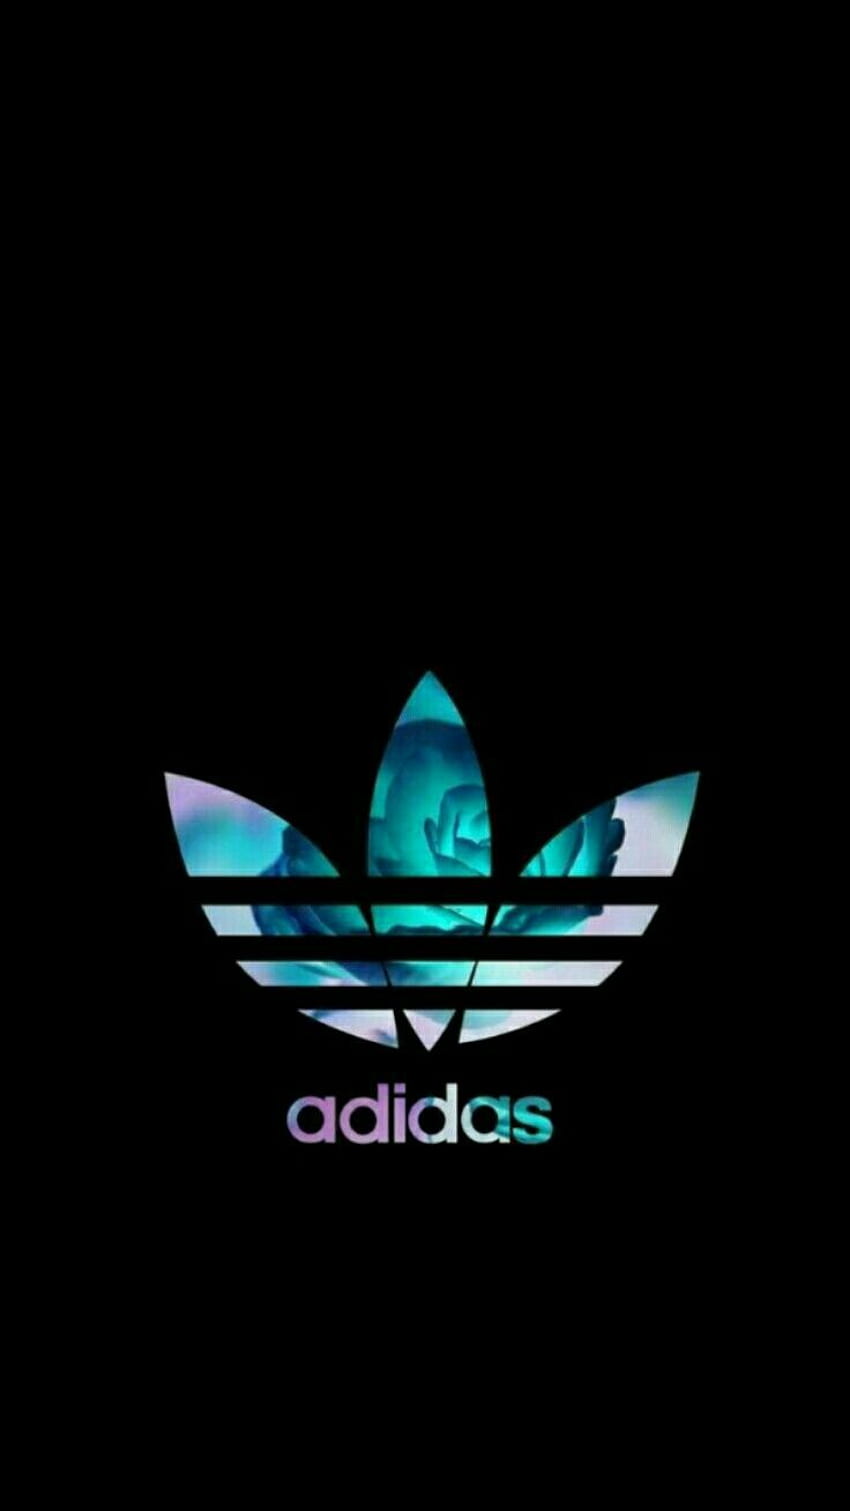 Jennifer Vargas on Wall paper for iPhone in 2019, Adidas Logo HD phone  wallpaper | Pxfuel